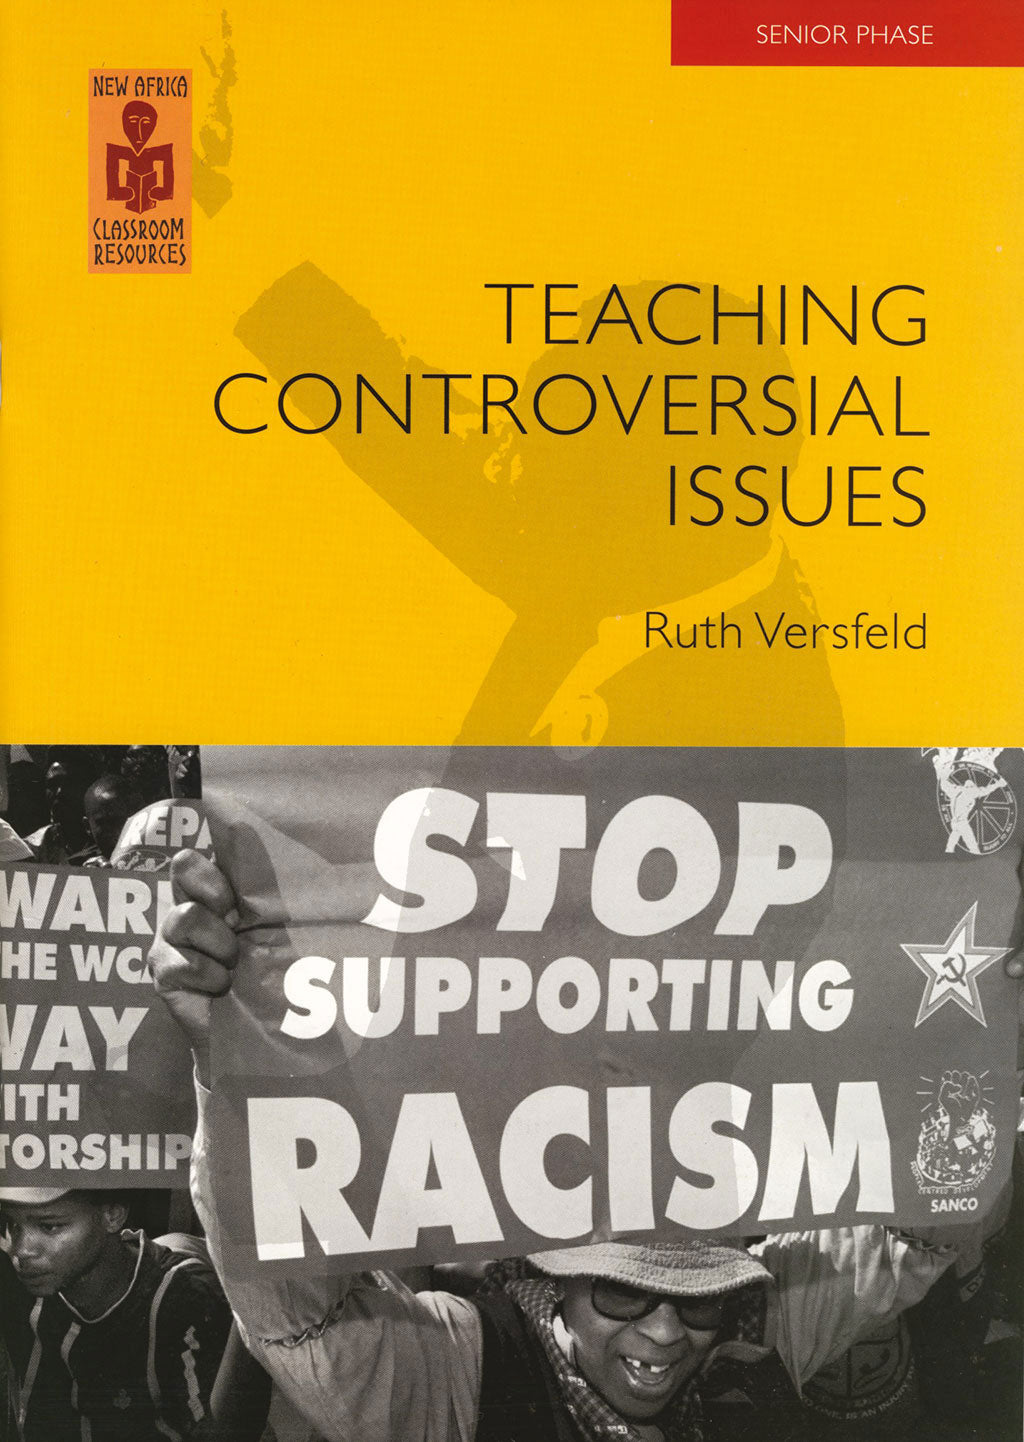 TEACHING CONTROVERSIAL ISSUES